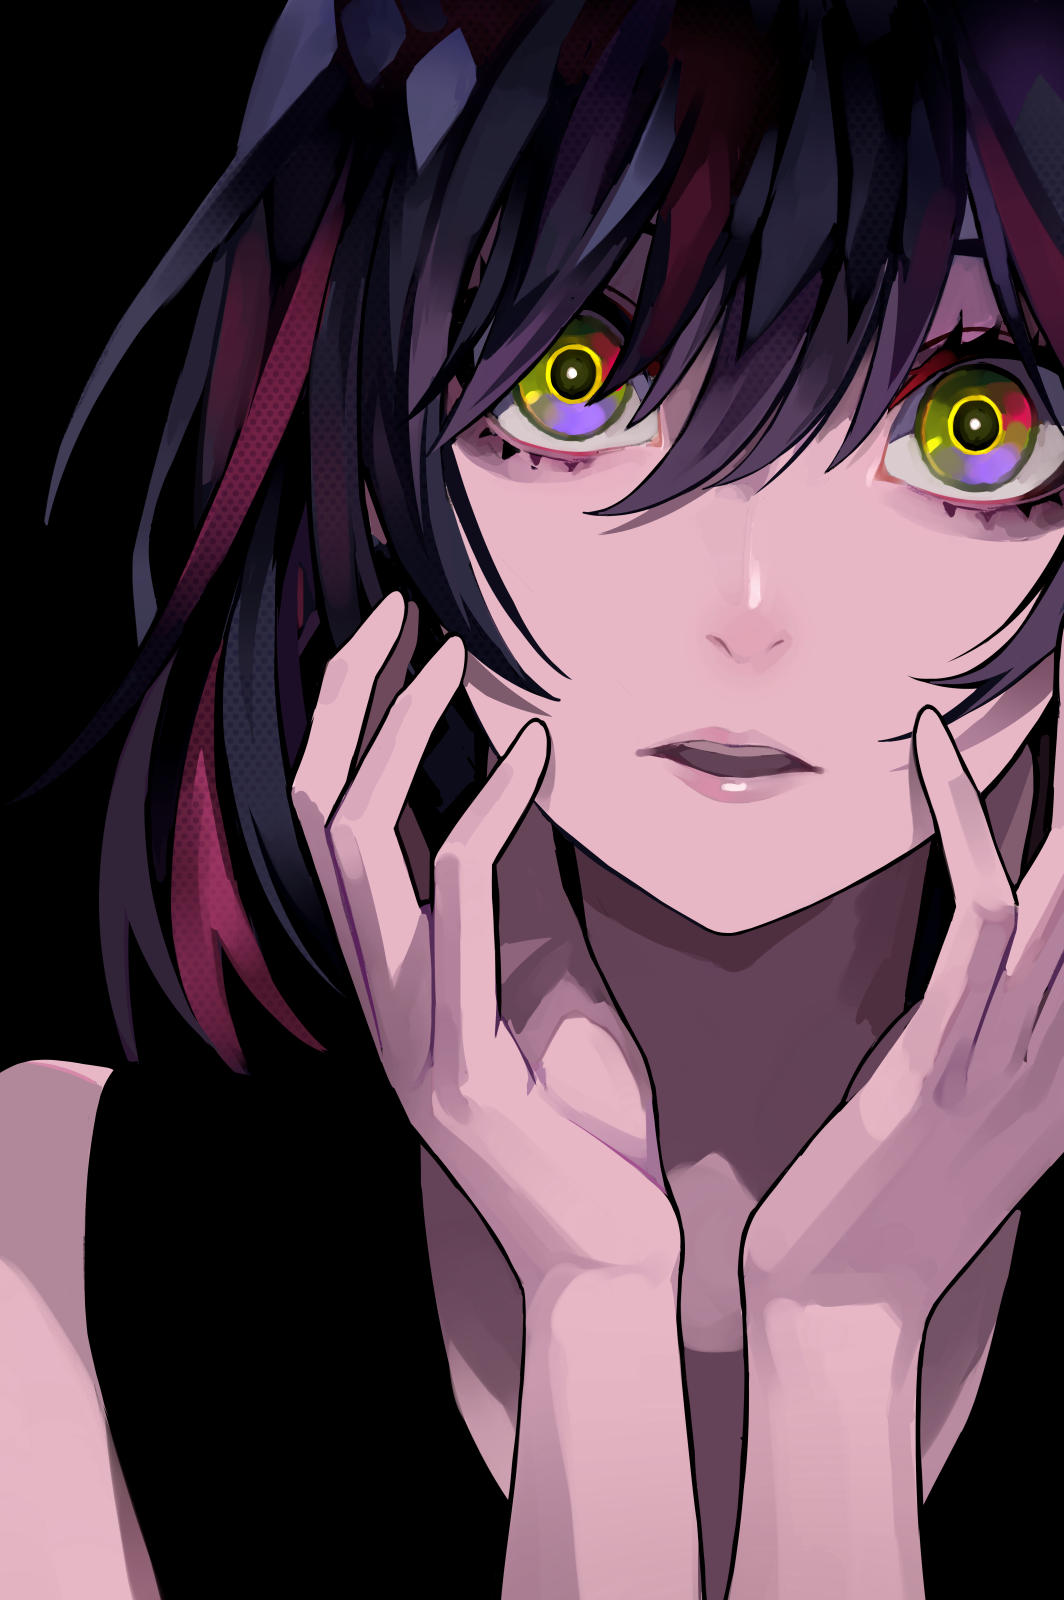 Anime 1064x1600 anime girls anime original characters dark hair shoulder length hair looking at viewer open mouth touching face portrait display black background dark artwork 2D digital art drawing LAM